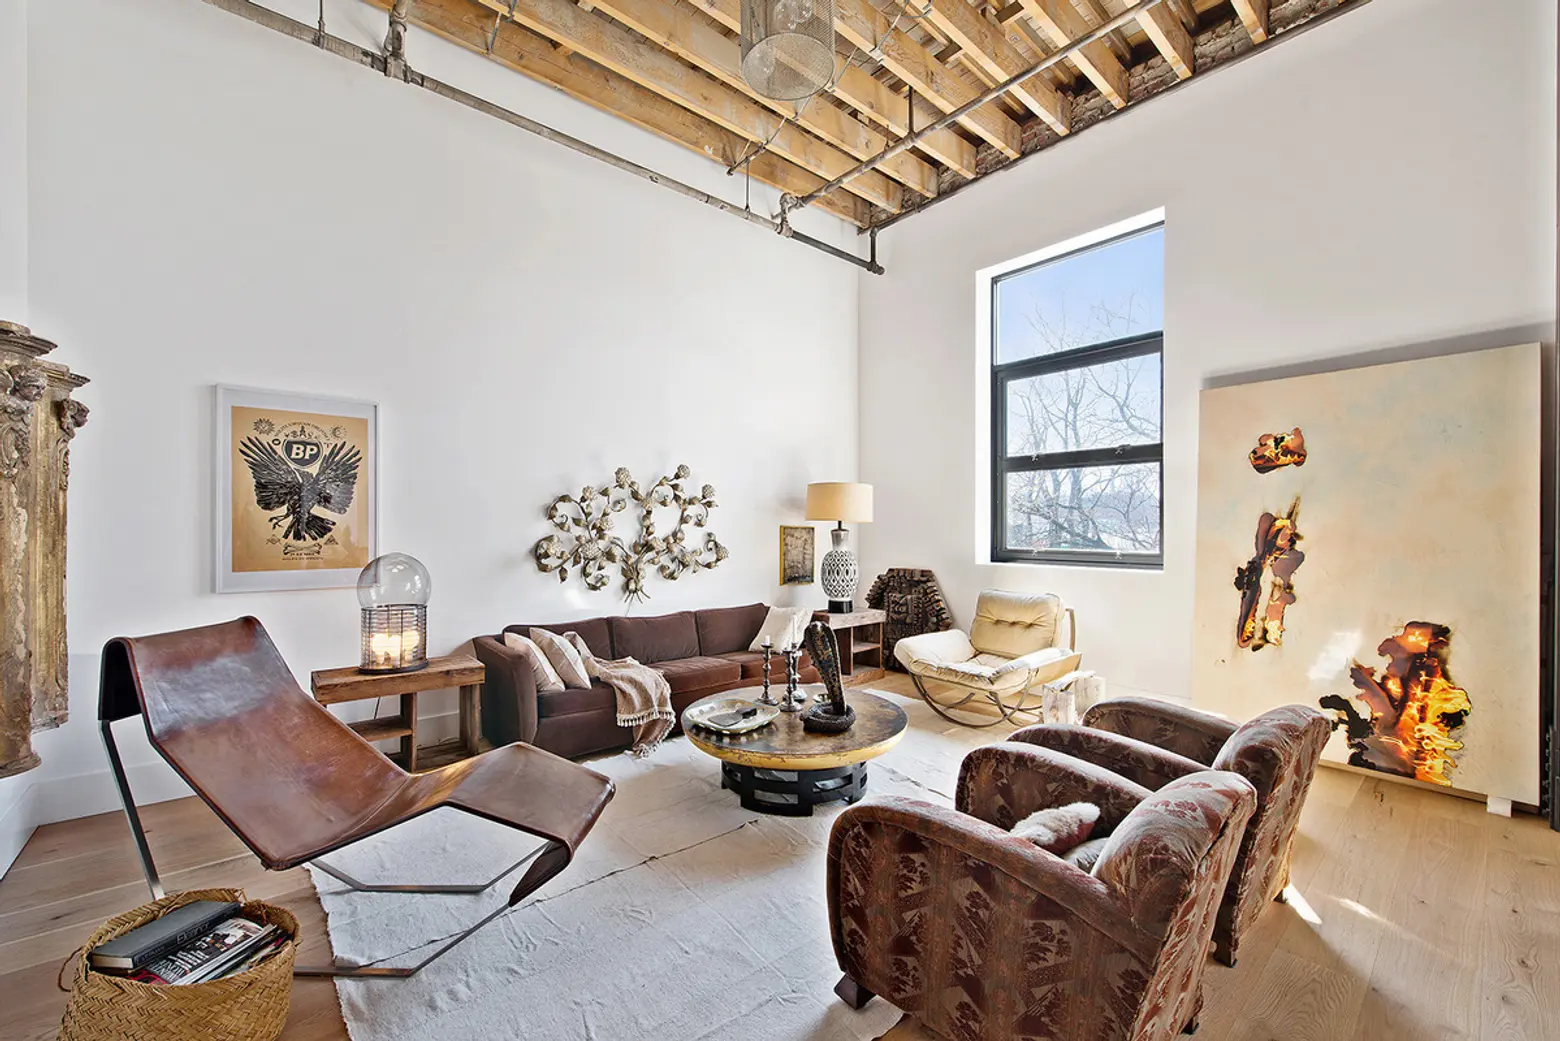 $1.8M Greenpoint Apartment Boasts Incredible 16-Foot High Exposed Ceilings